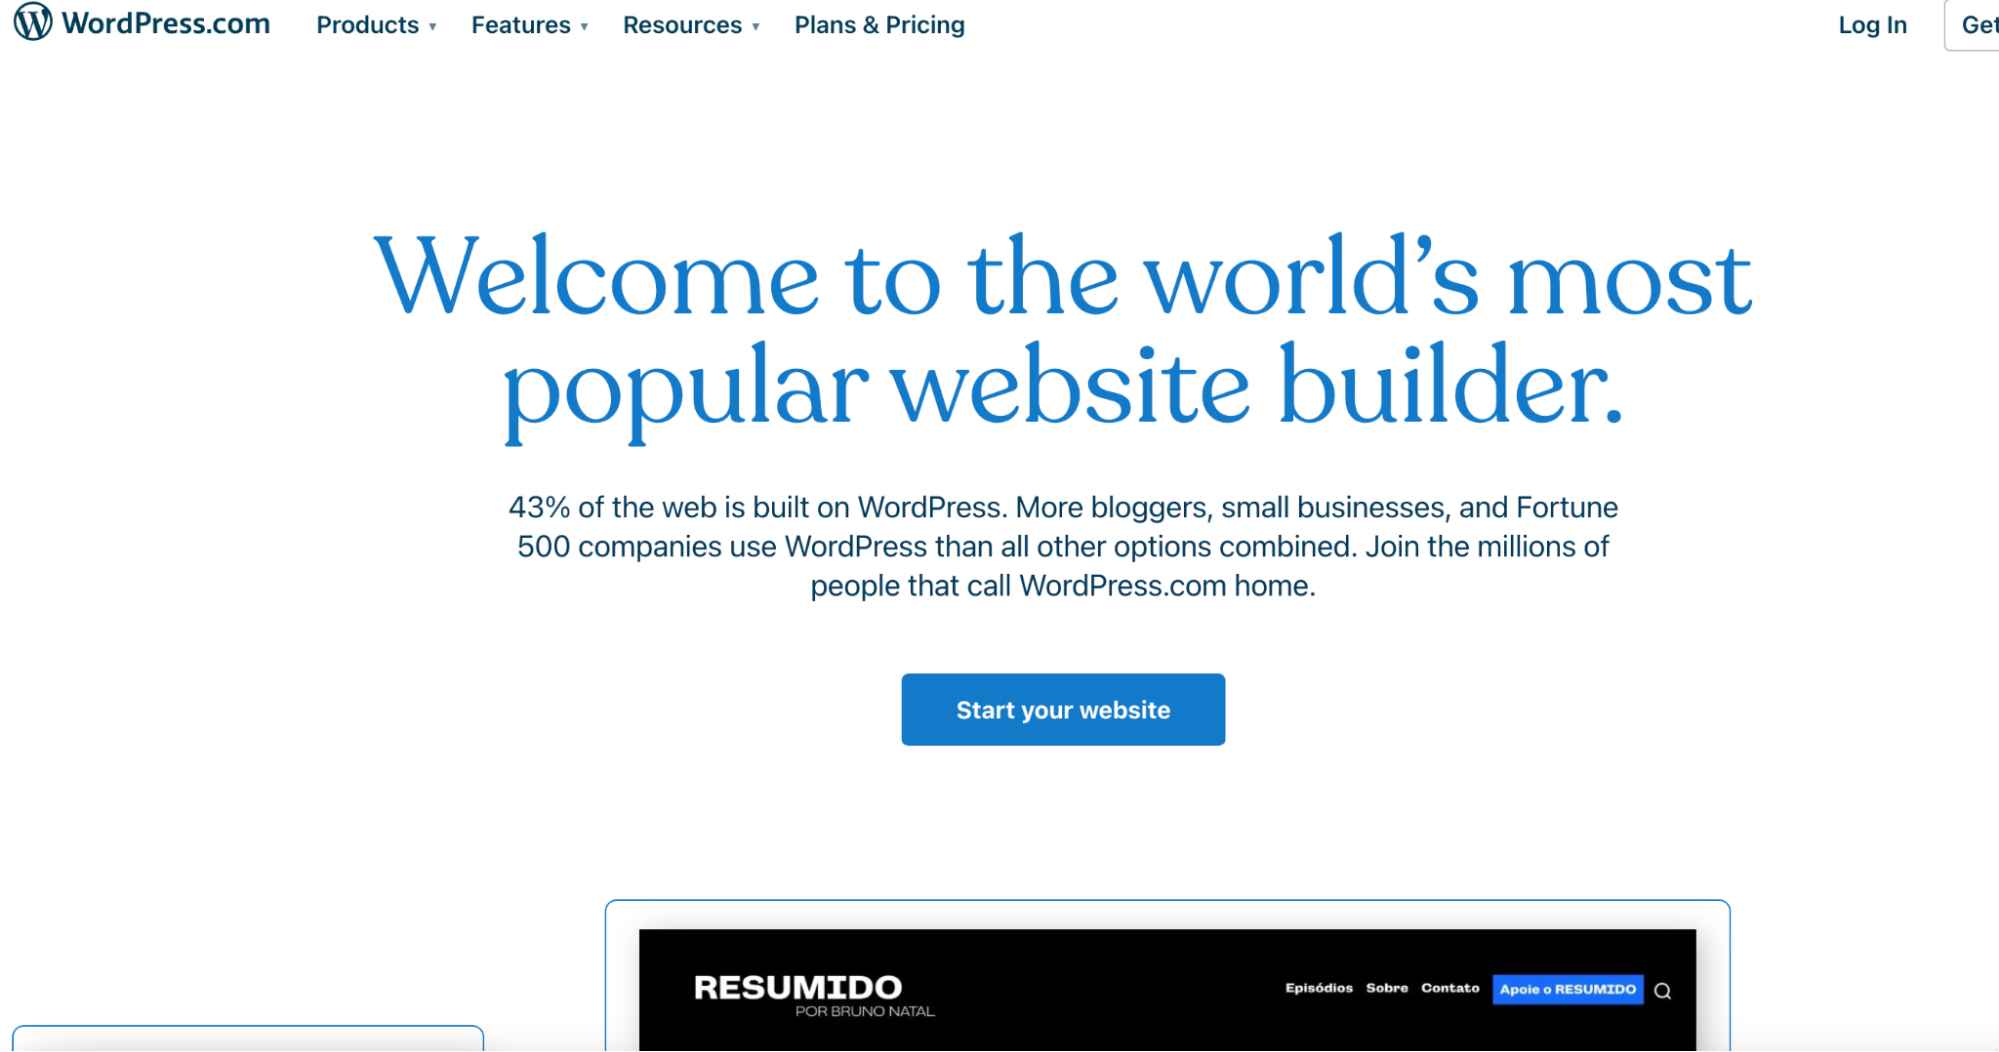 The homepage for WordPress